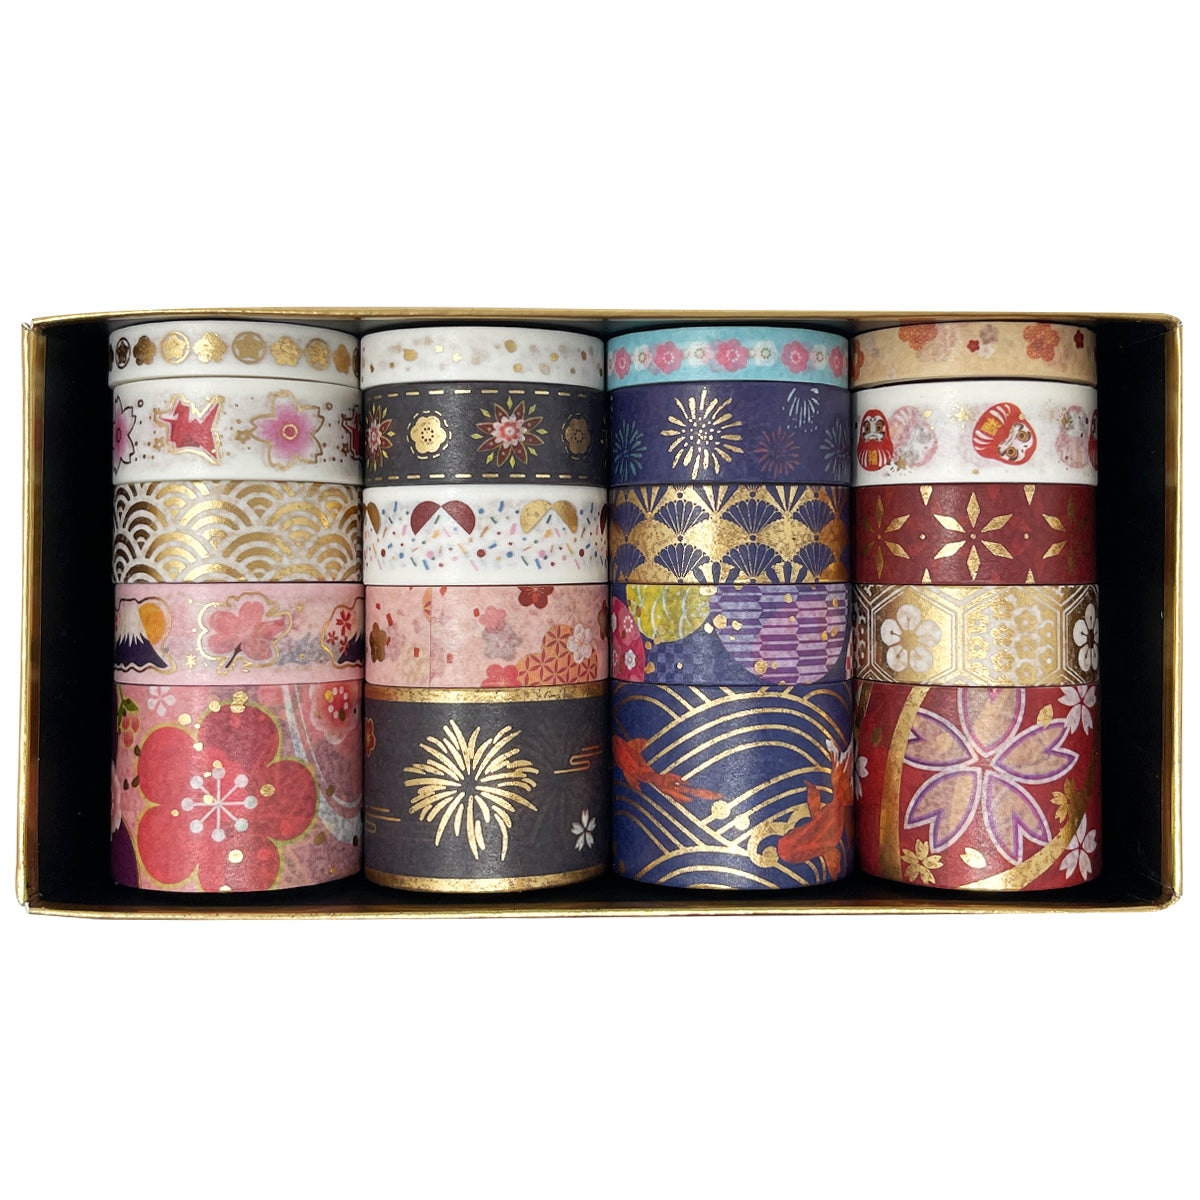 Wrapables Elegant Gold Foil Washi Tape Box Set for Arts & Crafts, Scrapbooking, Stationery, Diary (12 Rolls) Playful Florets